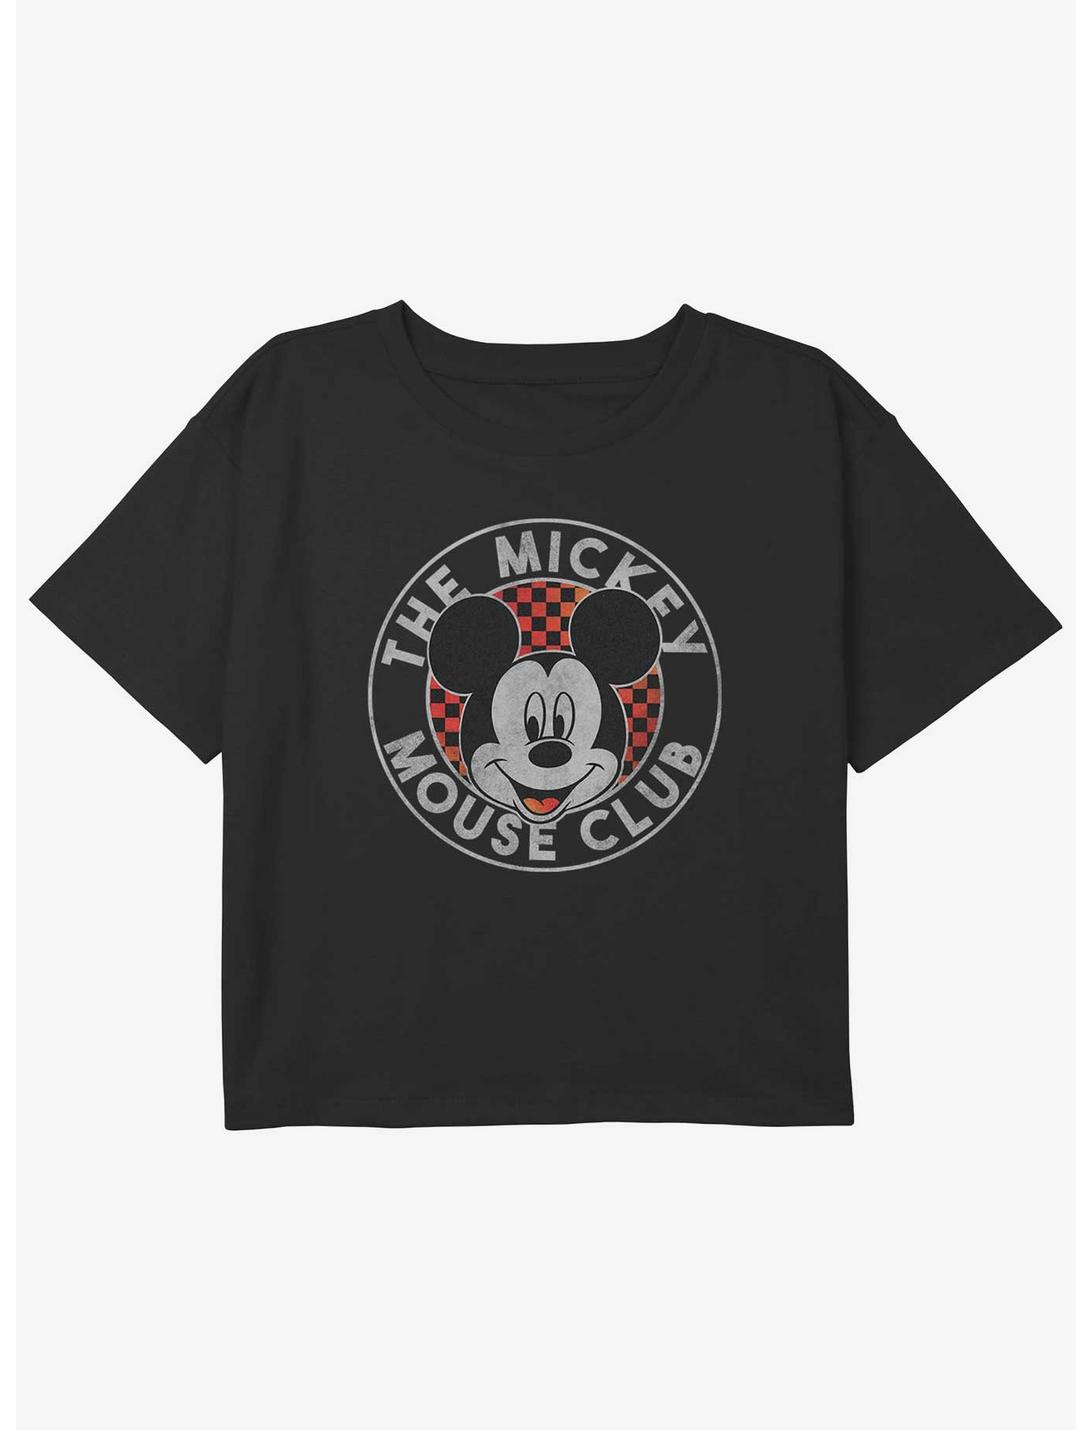 Disney Mickey Mouse The Mickey Mouse Club Girls Youth Crop T-Shirt, BLACK, hi-res